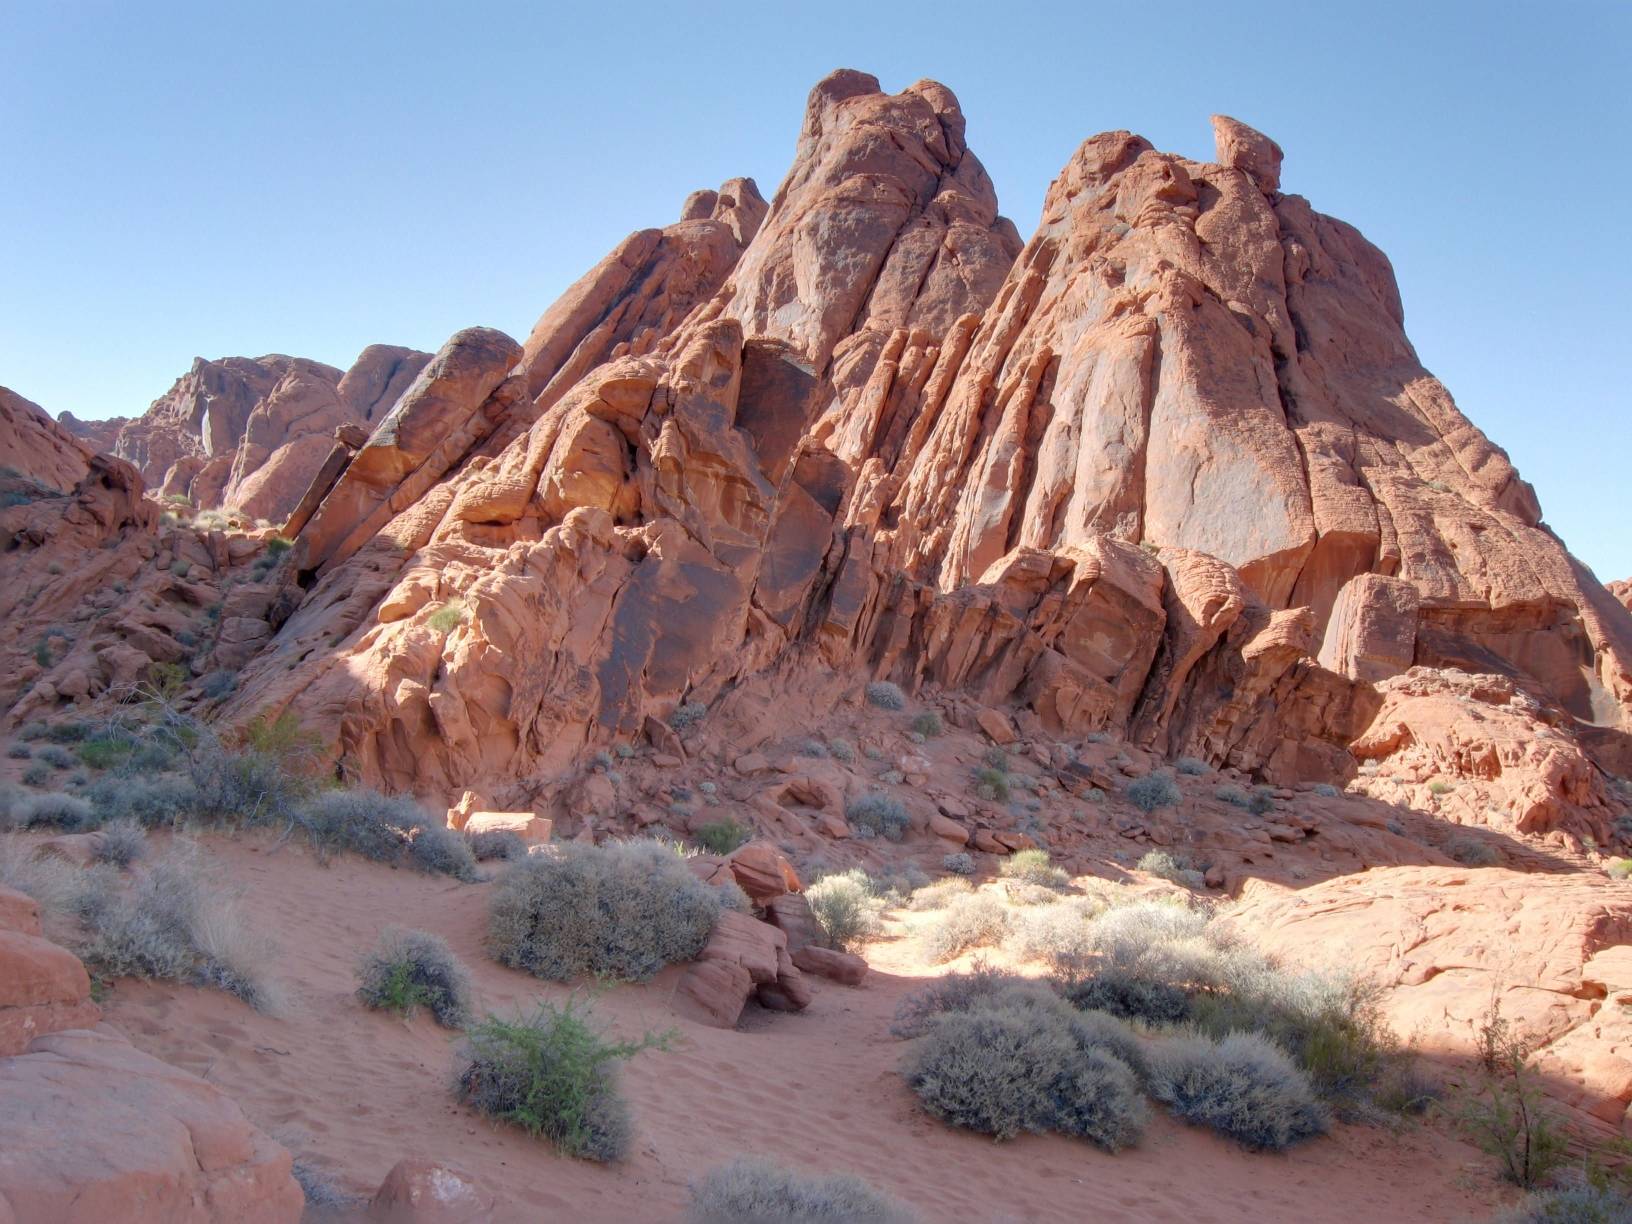 Image: A red sandstone rock formation along the White Domes Road